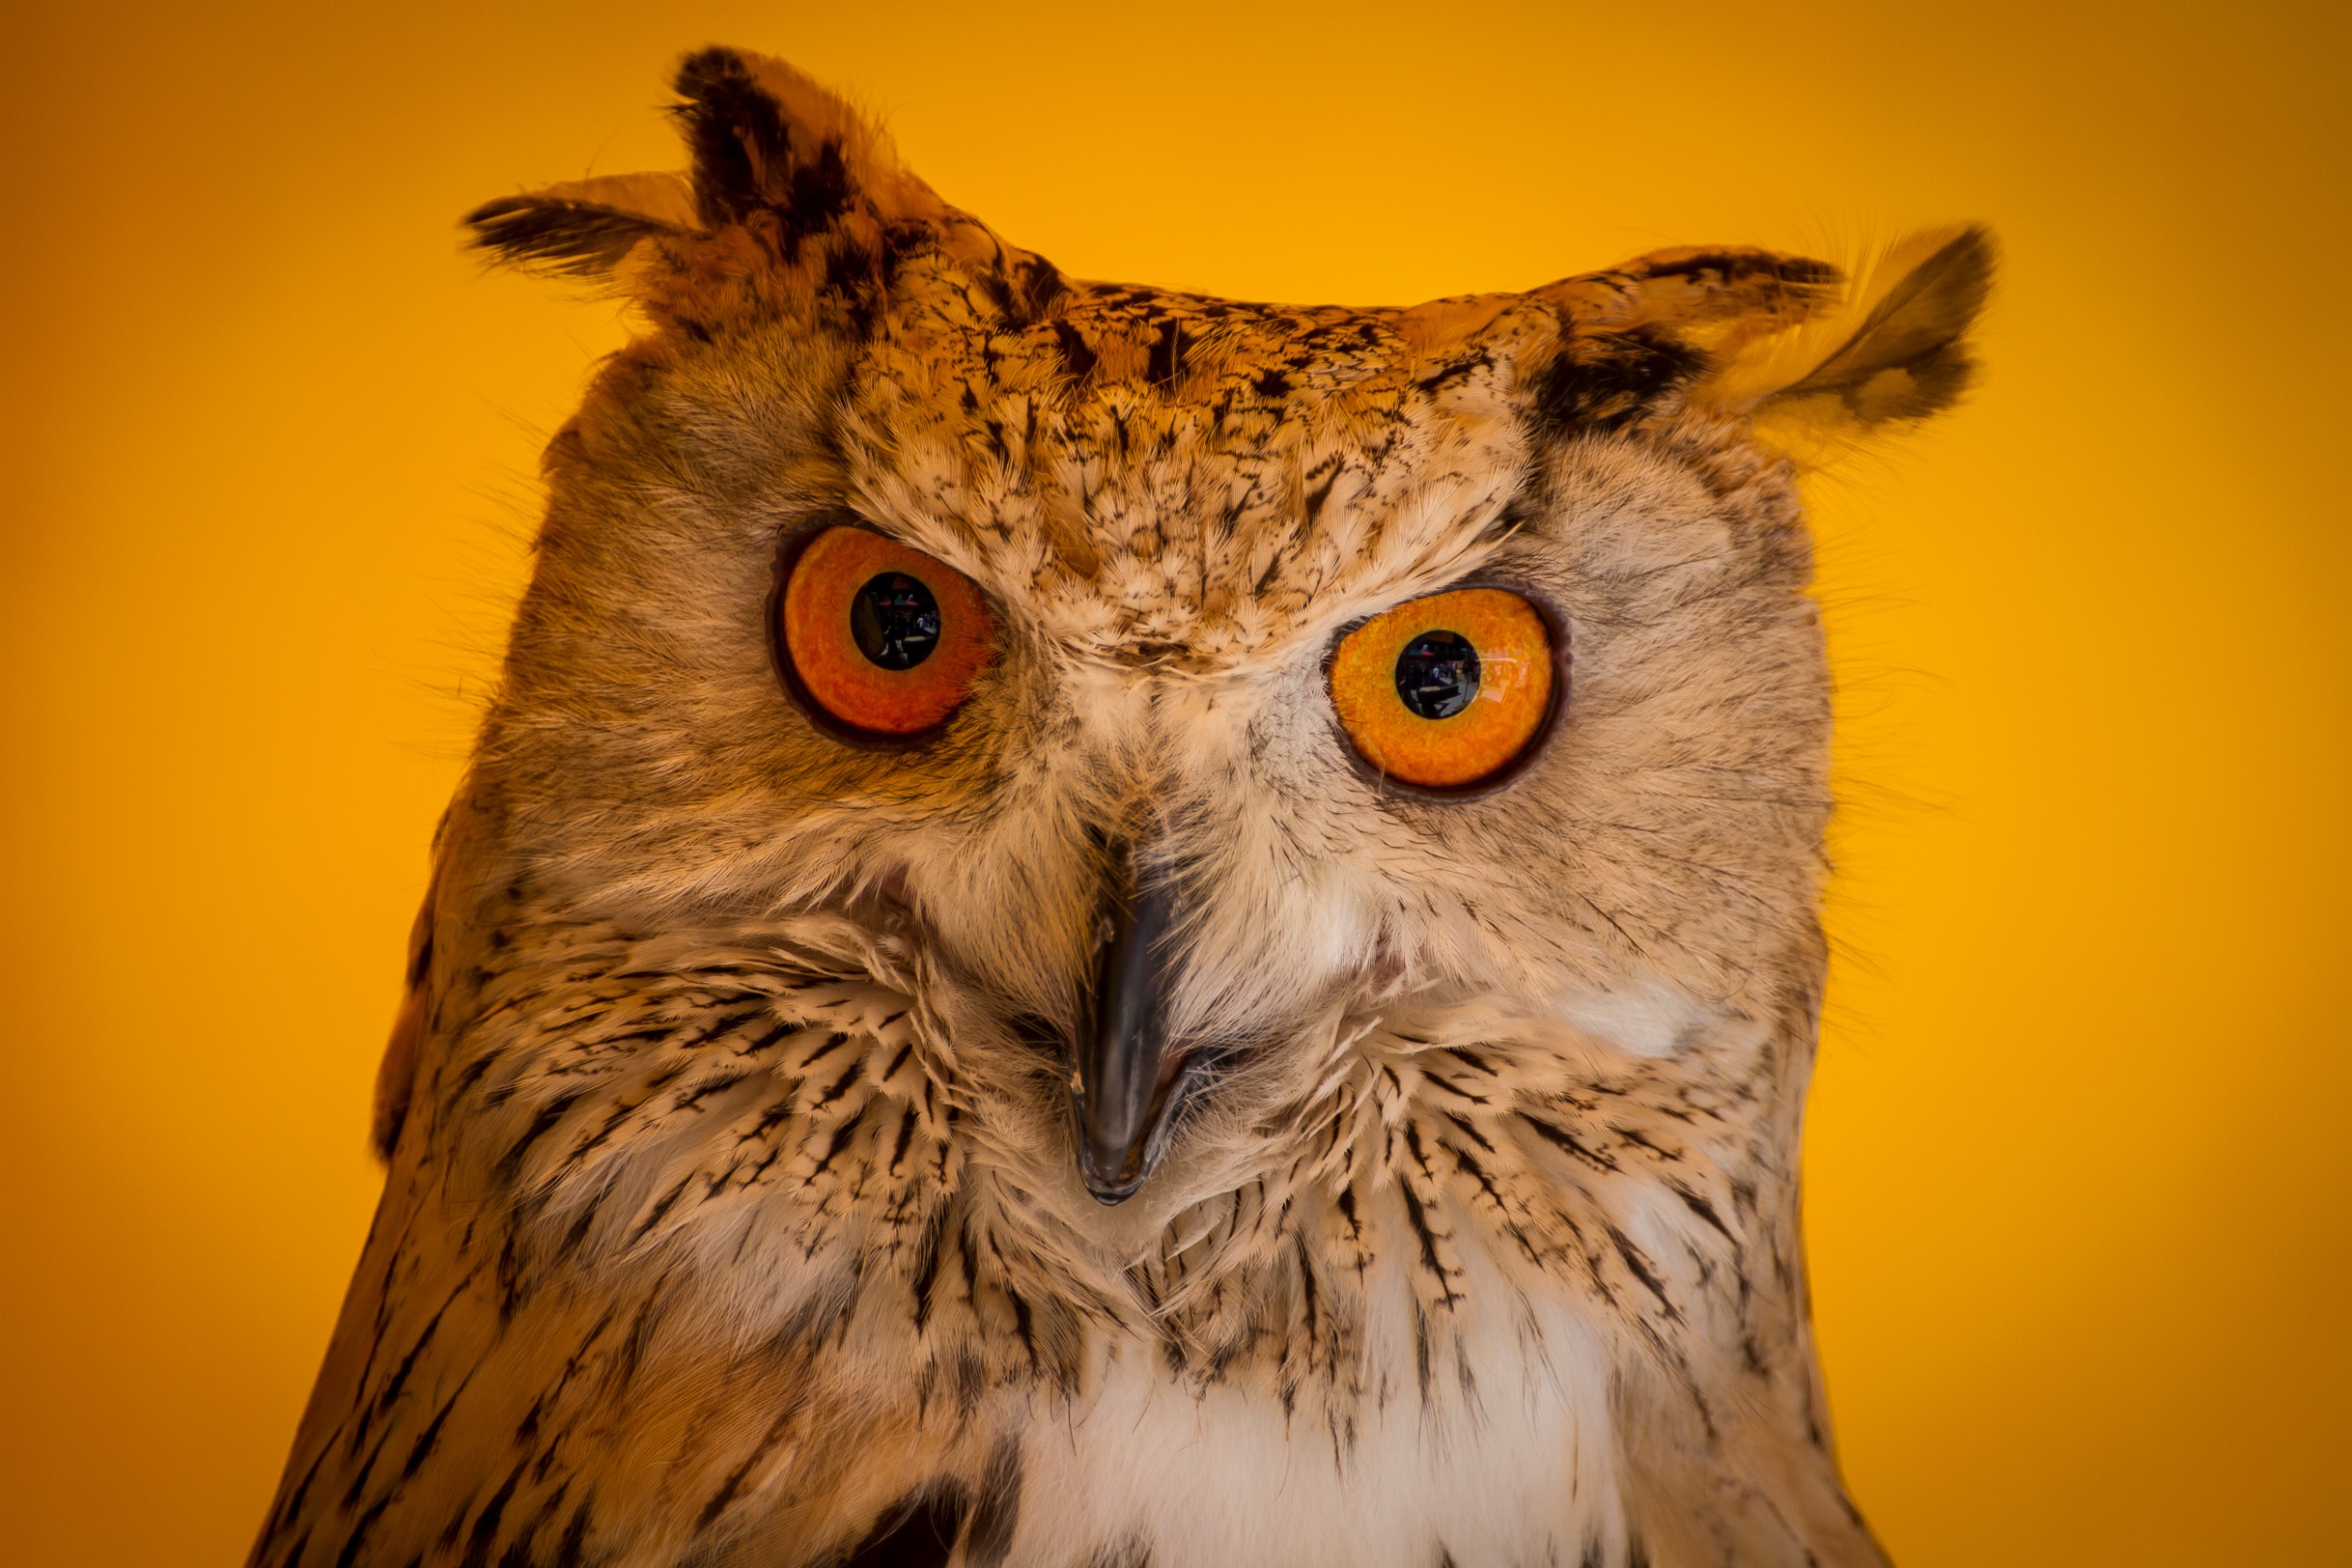 Angry brown and white owl on a yellow background, symbolizing a team member saying, "Why do I have to work differently?"